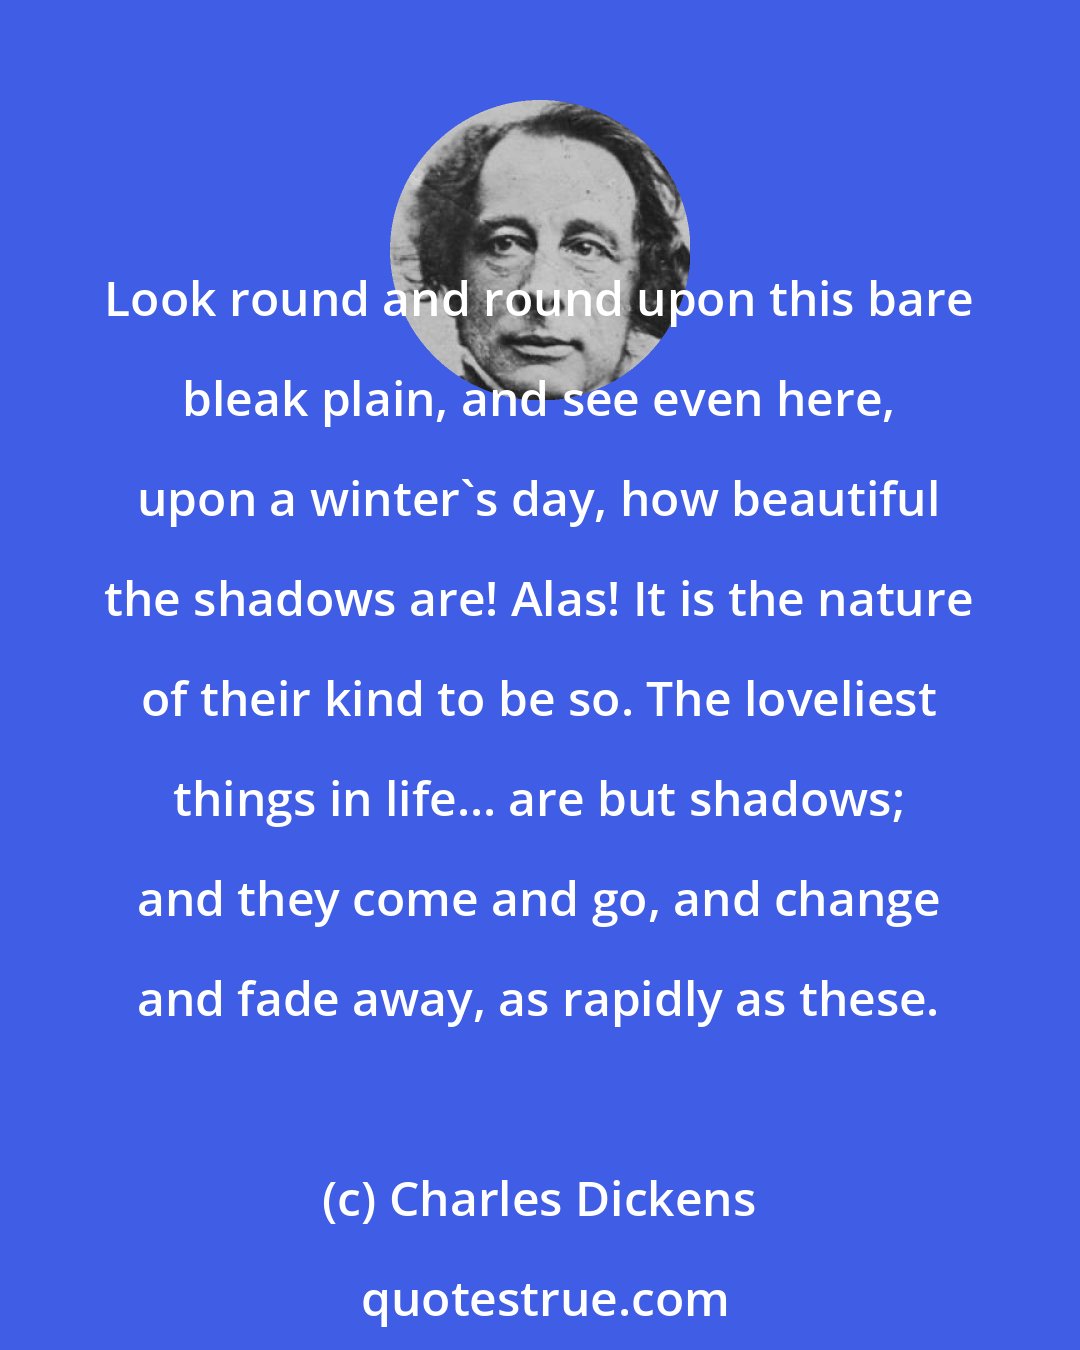 Charles Dickens: Look round and round upon this bare bleak plain, and see even here, upon a winter's day, how beautiful the shadows are! Alas! It is the nature of their kind to be so. The loveliest things in life... are but shadows; and they come and go, and change and fade away, as rapidly as these.